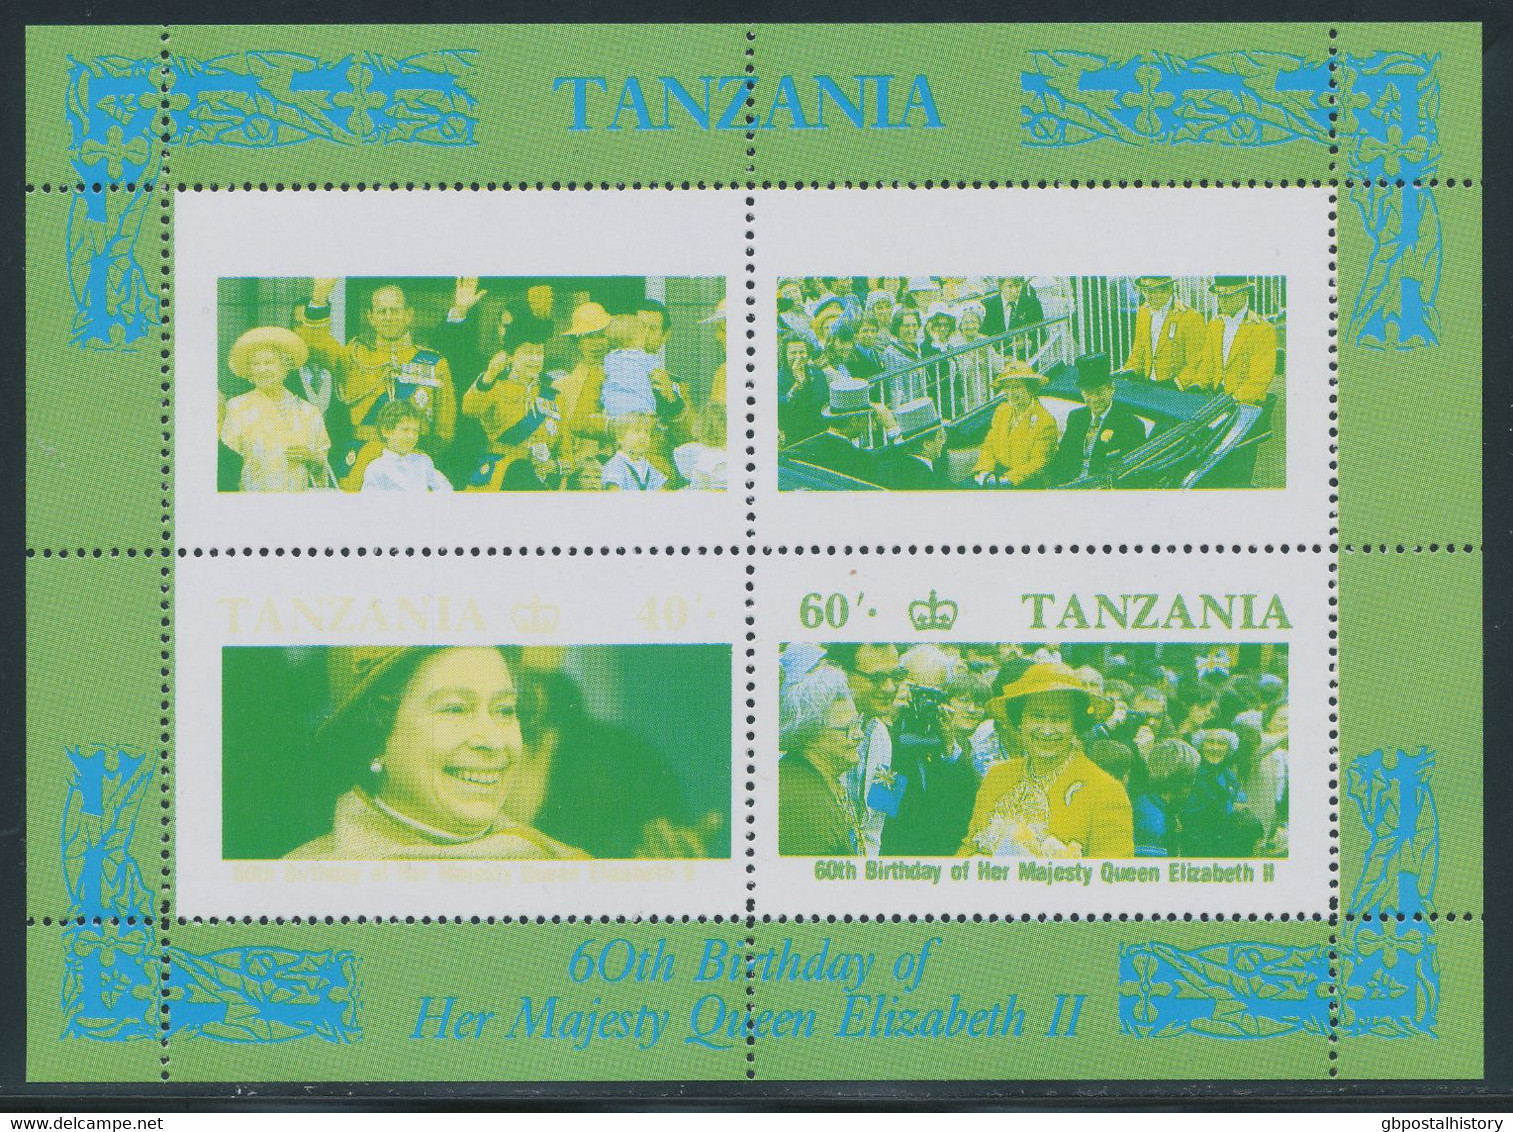 TANZANIA 1987, 60th Birthday Of Queen Elizabeth II, MAJOR VARIETY: Superb U/M MS With MISSING COLORS Red And Black, - Tanzania (1964-...)